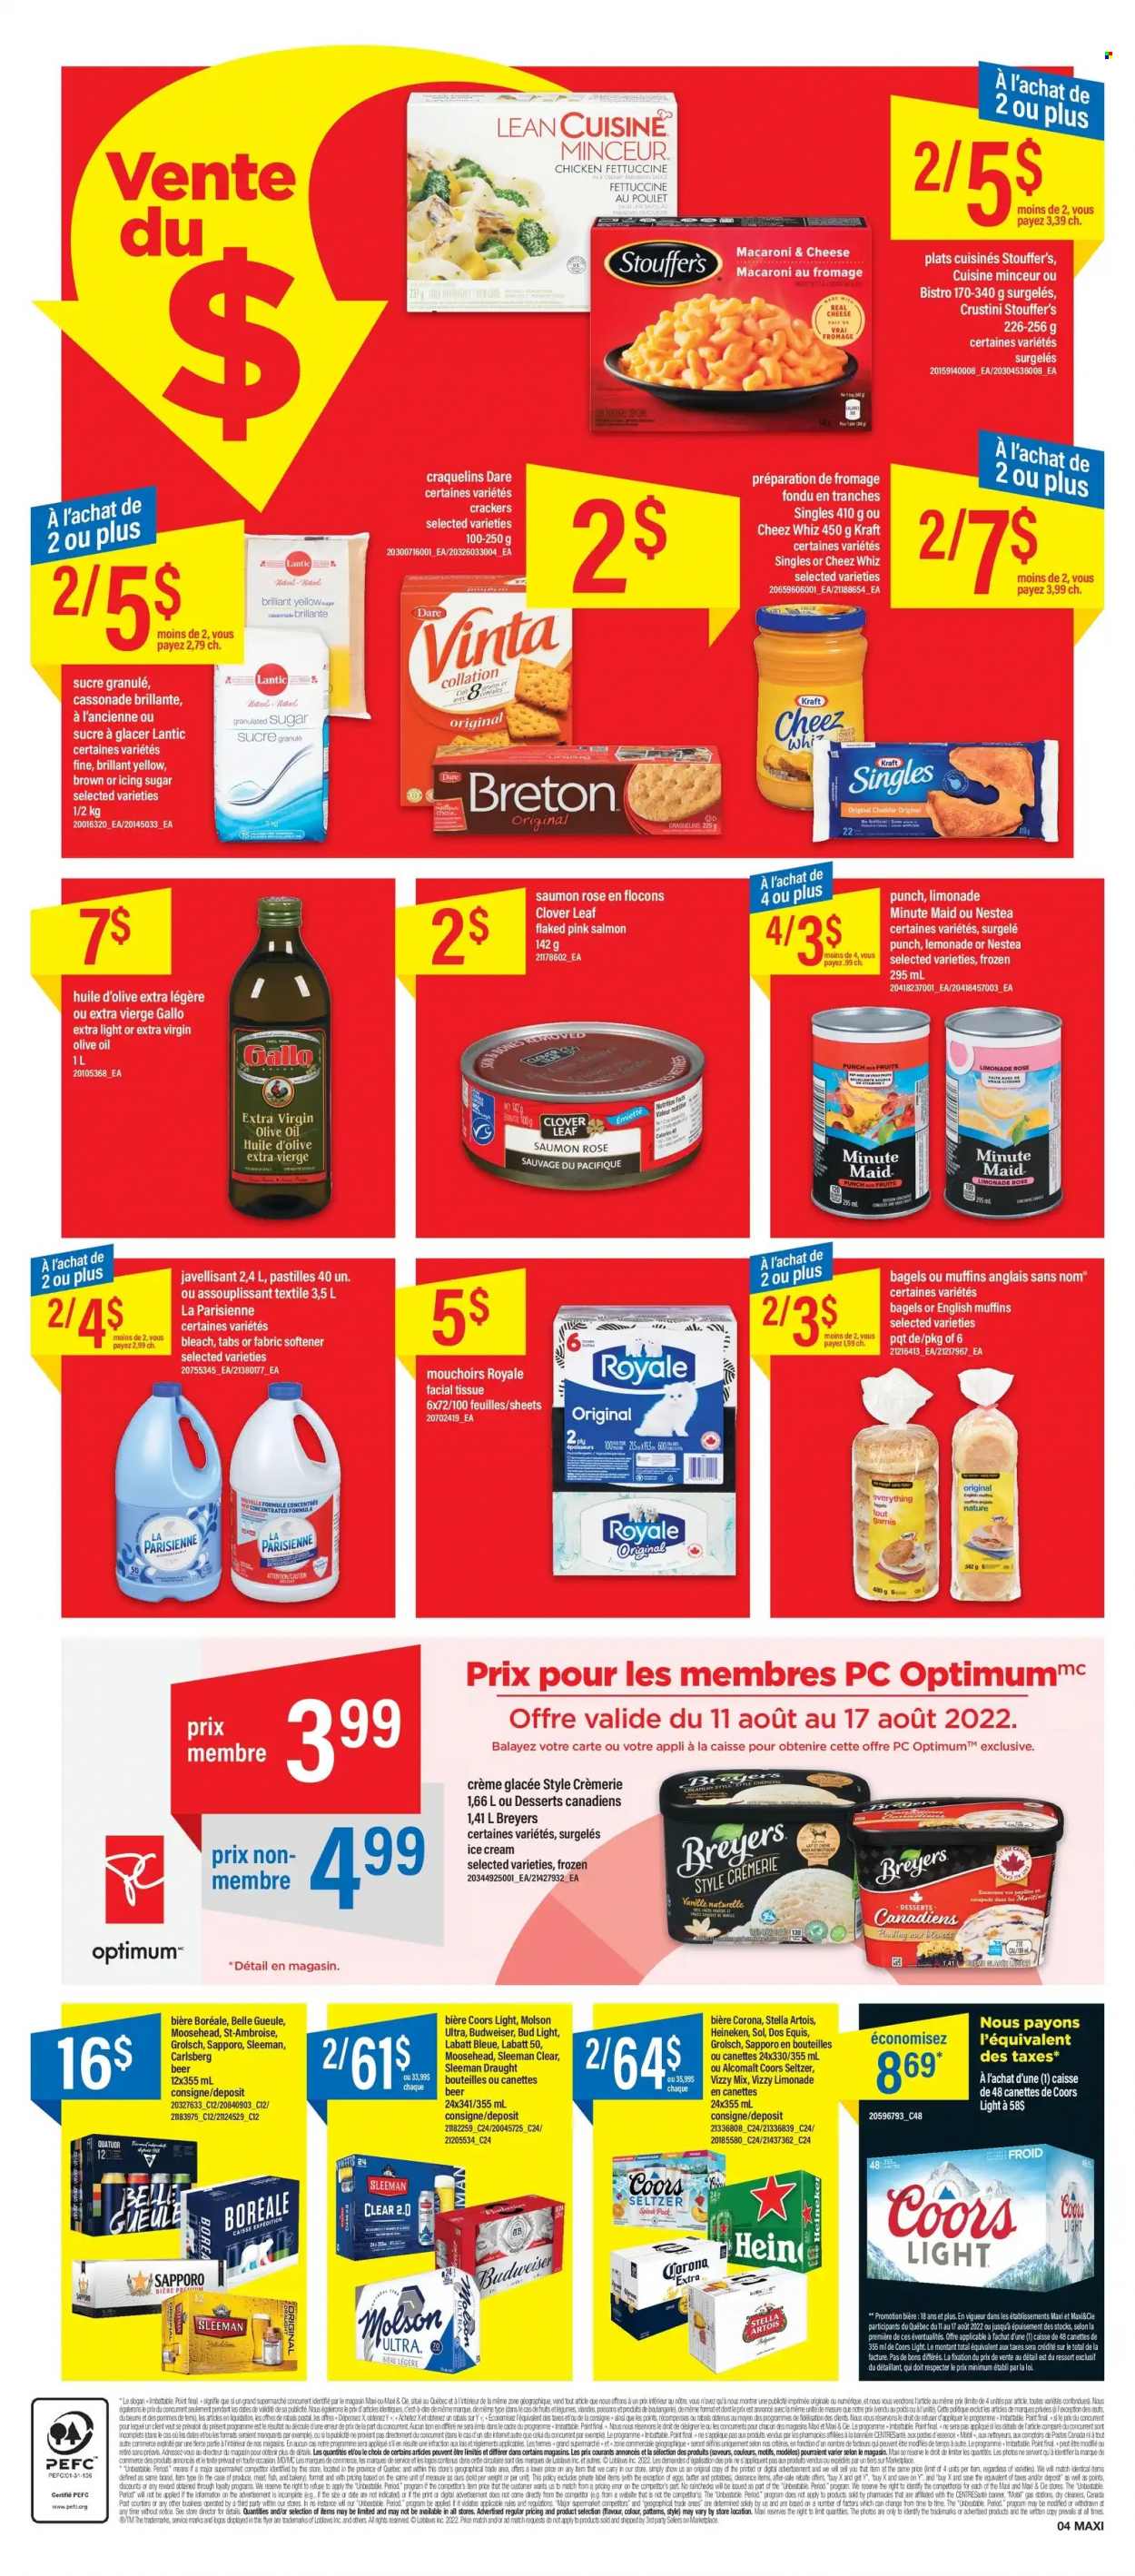 thumbnail - Maxi Flyer - August 11, 2022 - August 17, 2022 - Sales products - bagels, english muffins, salmon, fish, macaroni & cheese, sauce, Lean Cuisine, Kraft®, parmesan, Clover, eggs, ice cream, Stouffer's, crackers, pastilles, granulated sugar, sugar, icing sugar, extra virgin olive oil, olive oil, oil, lemonade, fruit punch, seltzer water, rosé wine, beer, Bud Light, Corona Extra, Heineken, Carlsberg, Sol, Grolsch, tissues, bleach, fabric softener, Budweiser, Stella Artois, Coors, Dos Equis. Page 4.